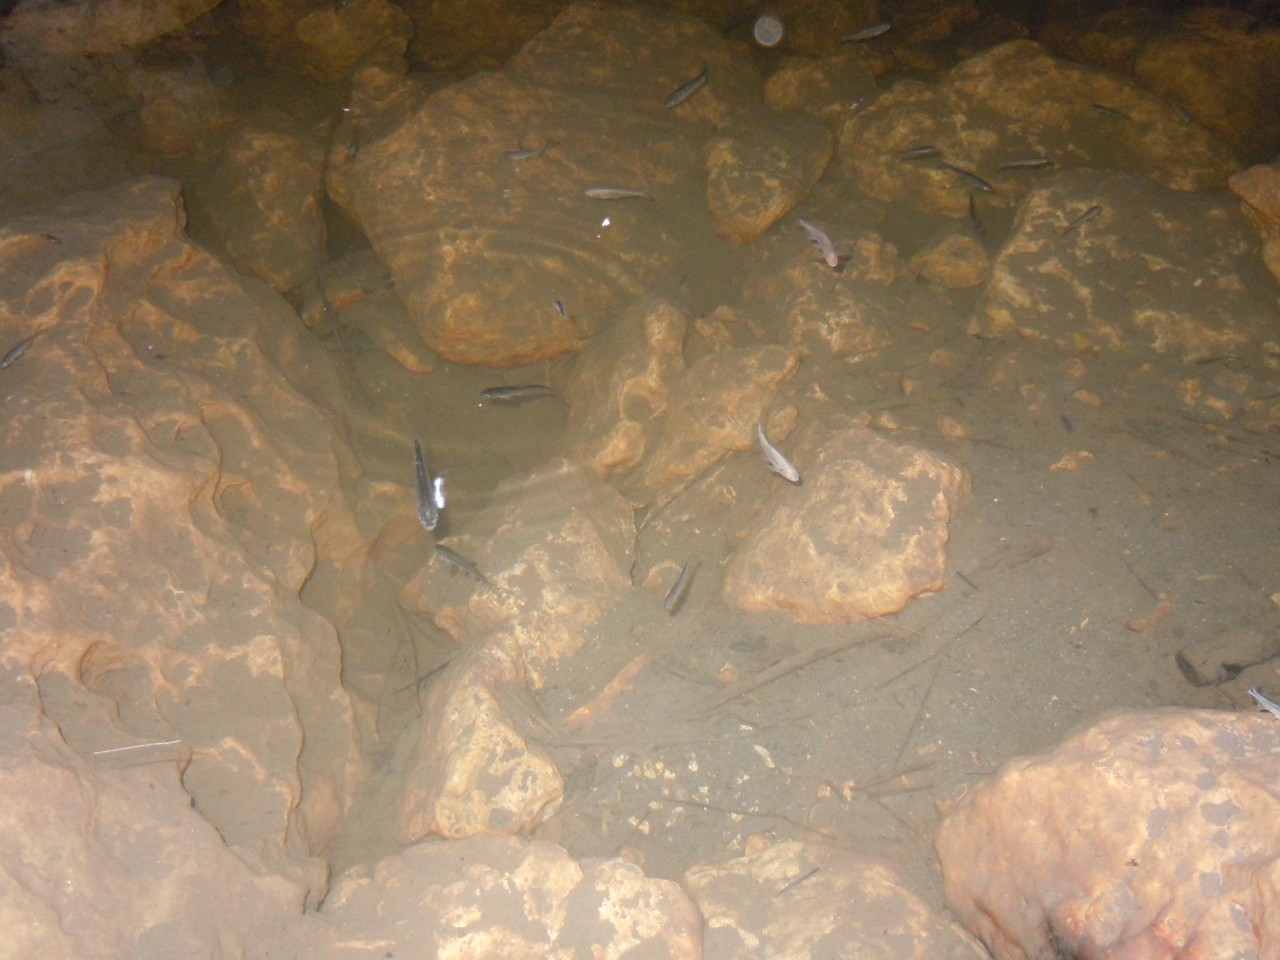 Cavefish inhabit shallow pools in the limestone caves of Mexico's Sierra del Abra Tanchipa.